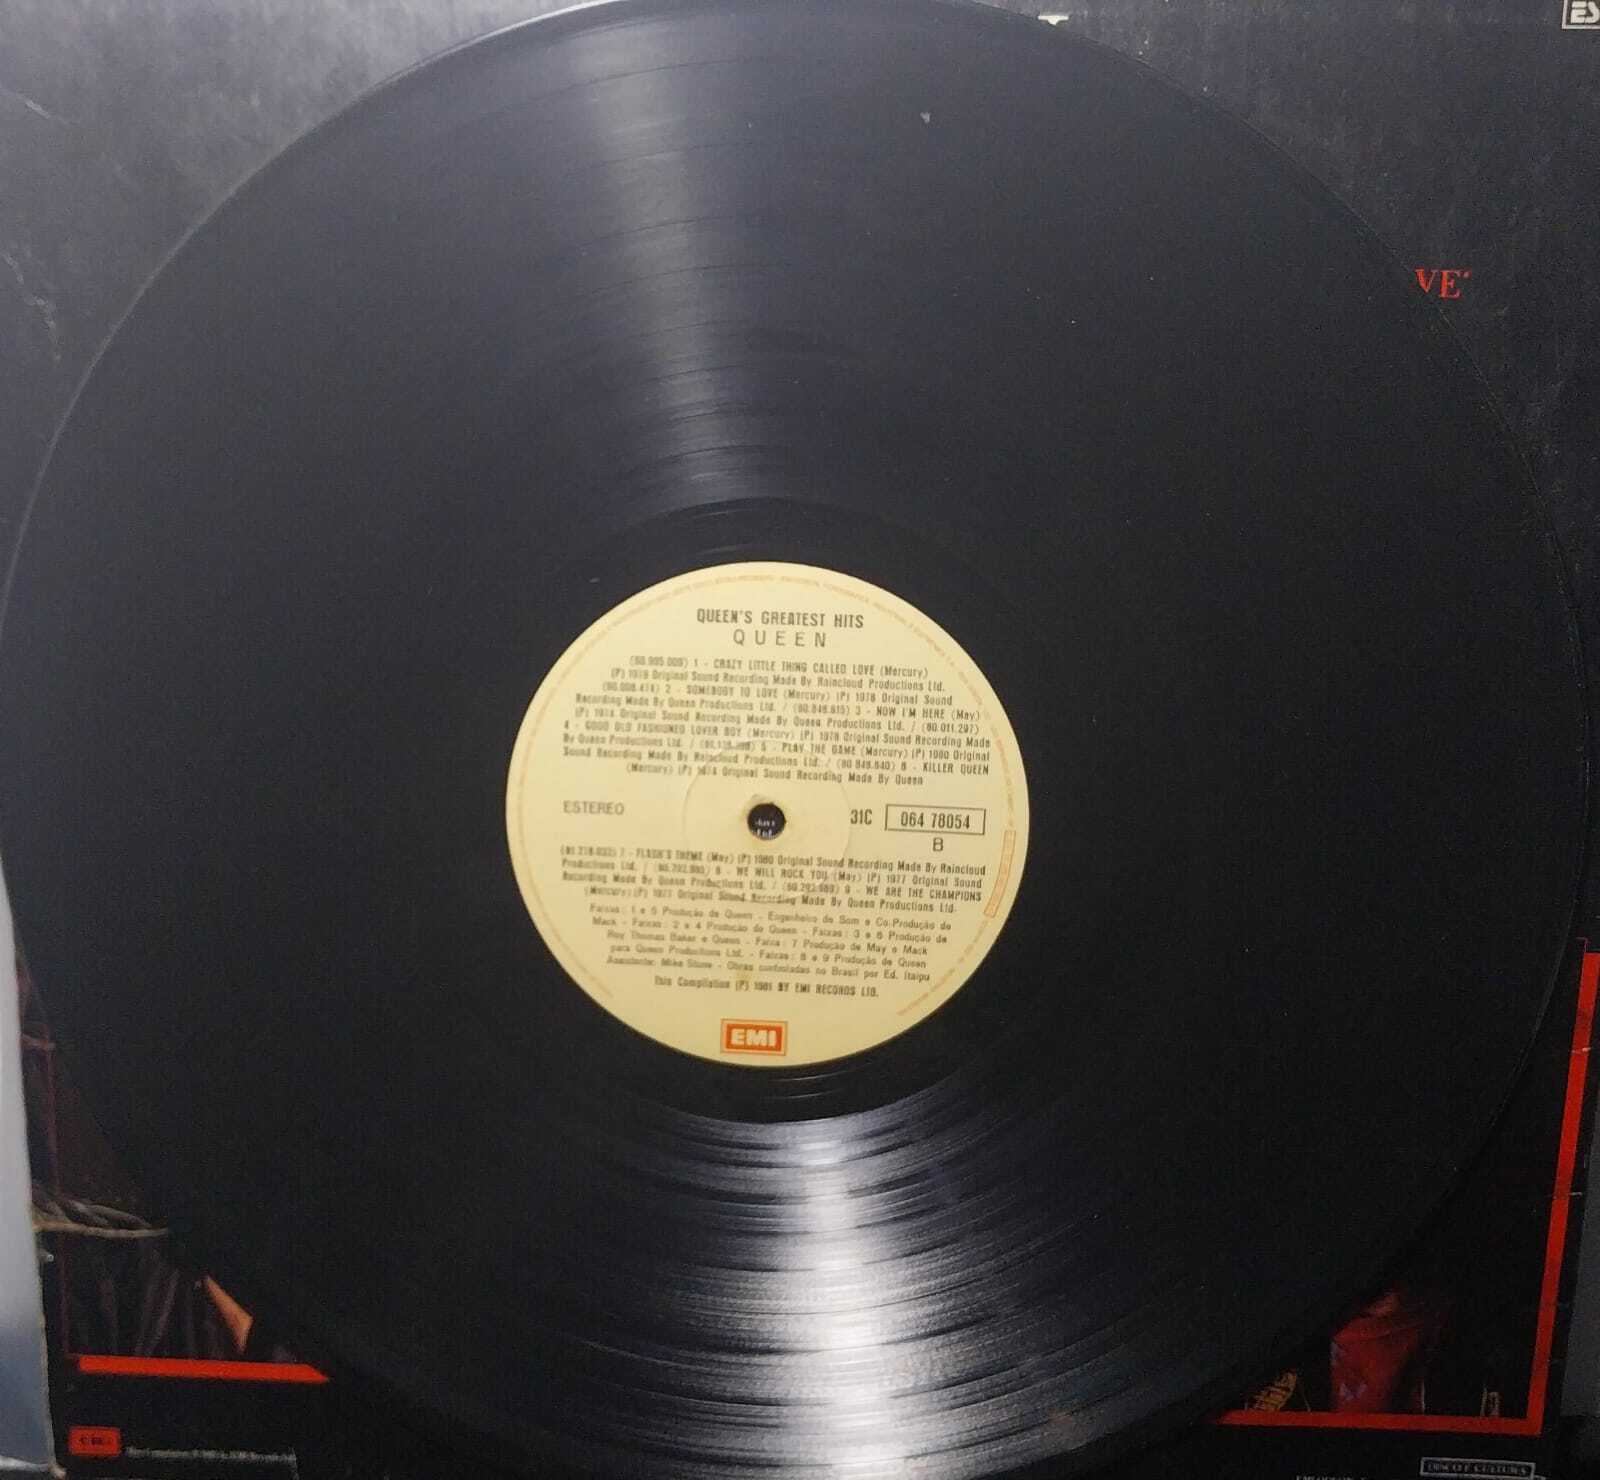 Vinil - Queen - Greatest hits